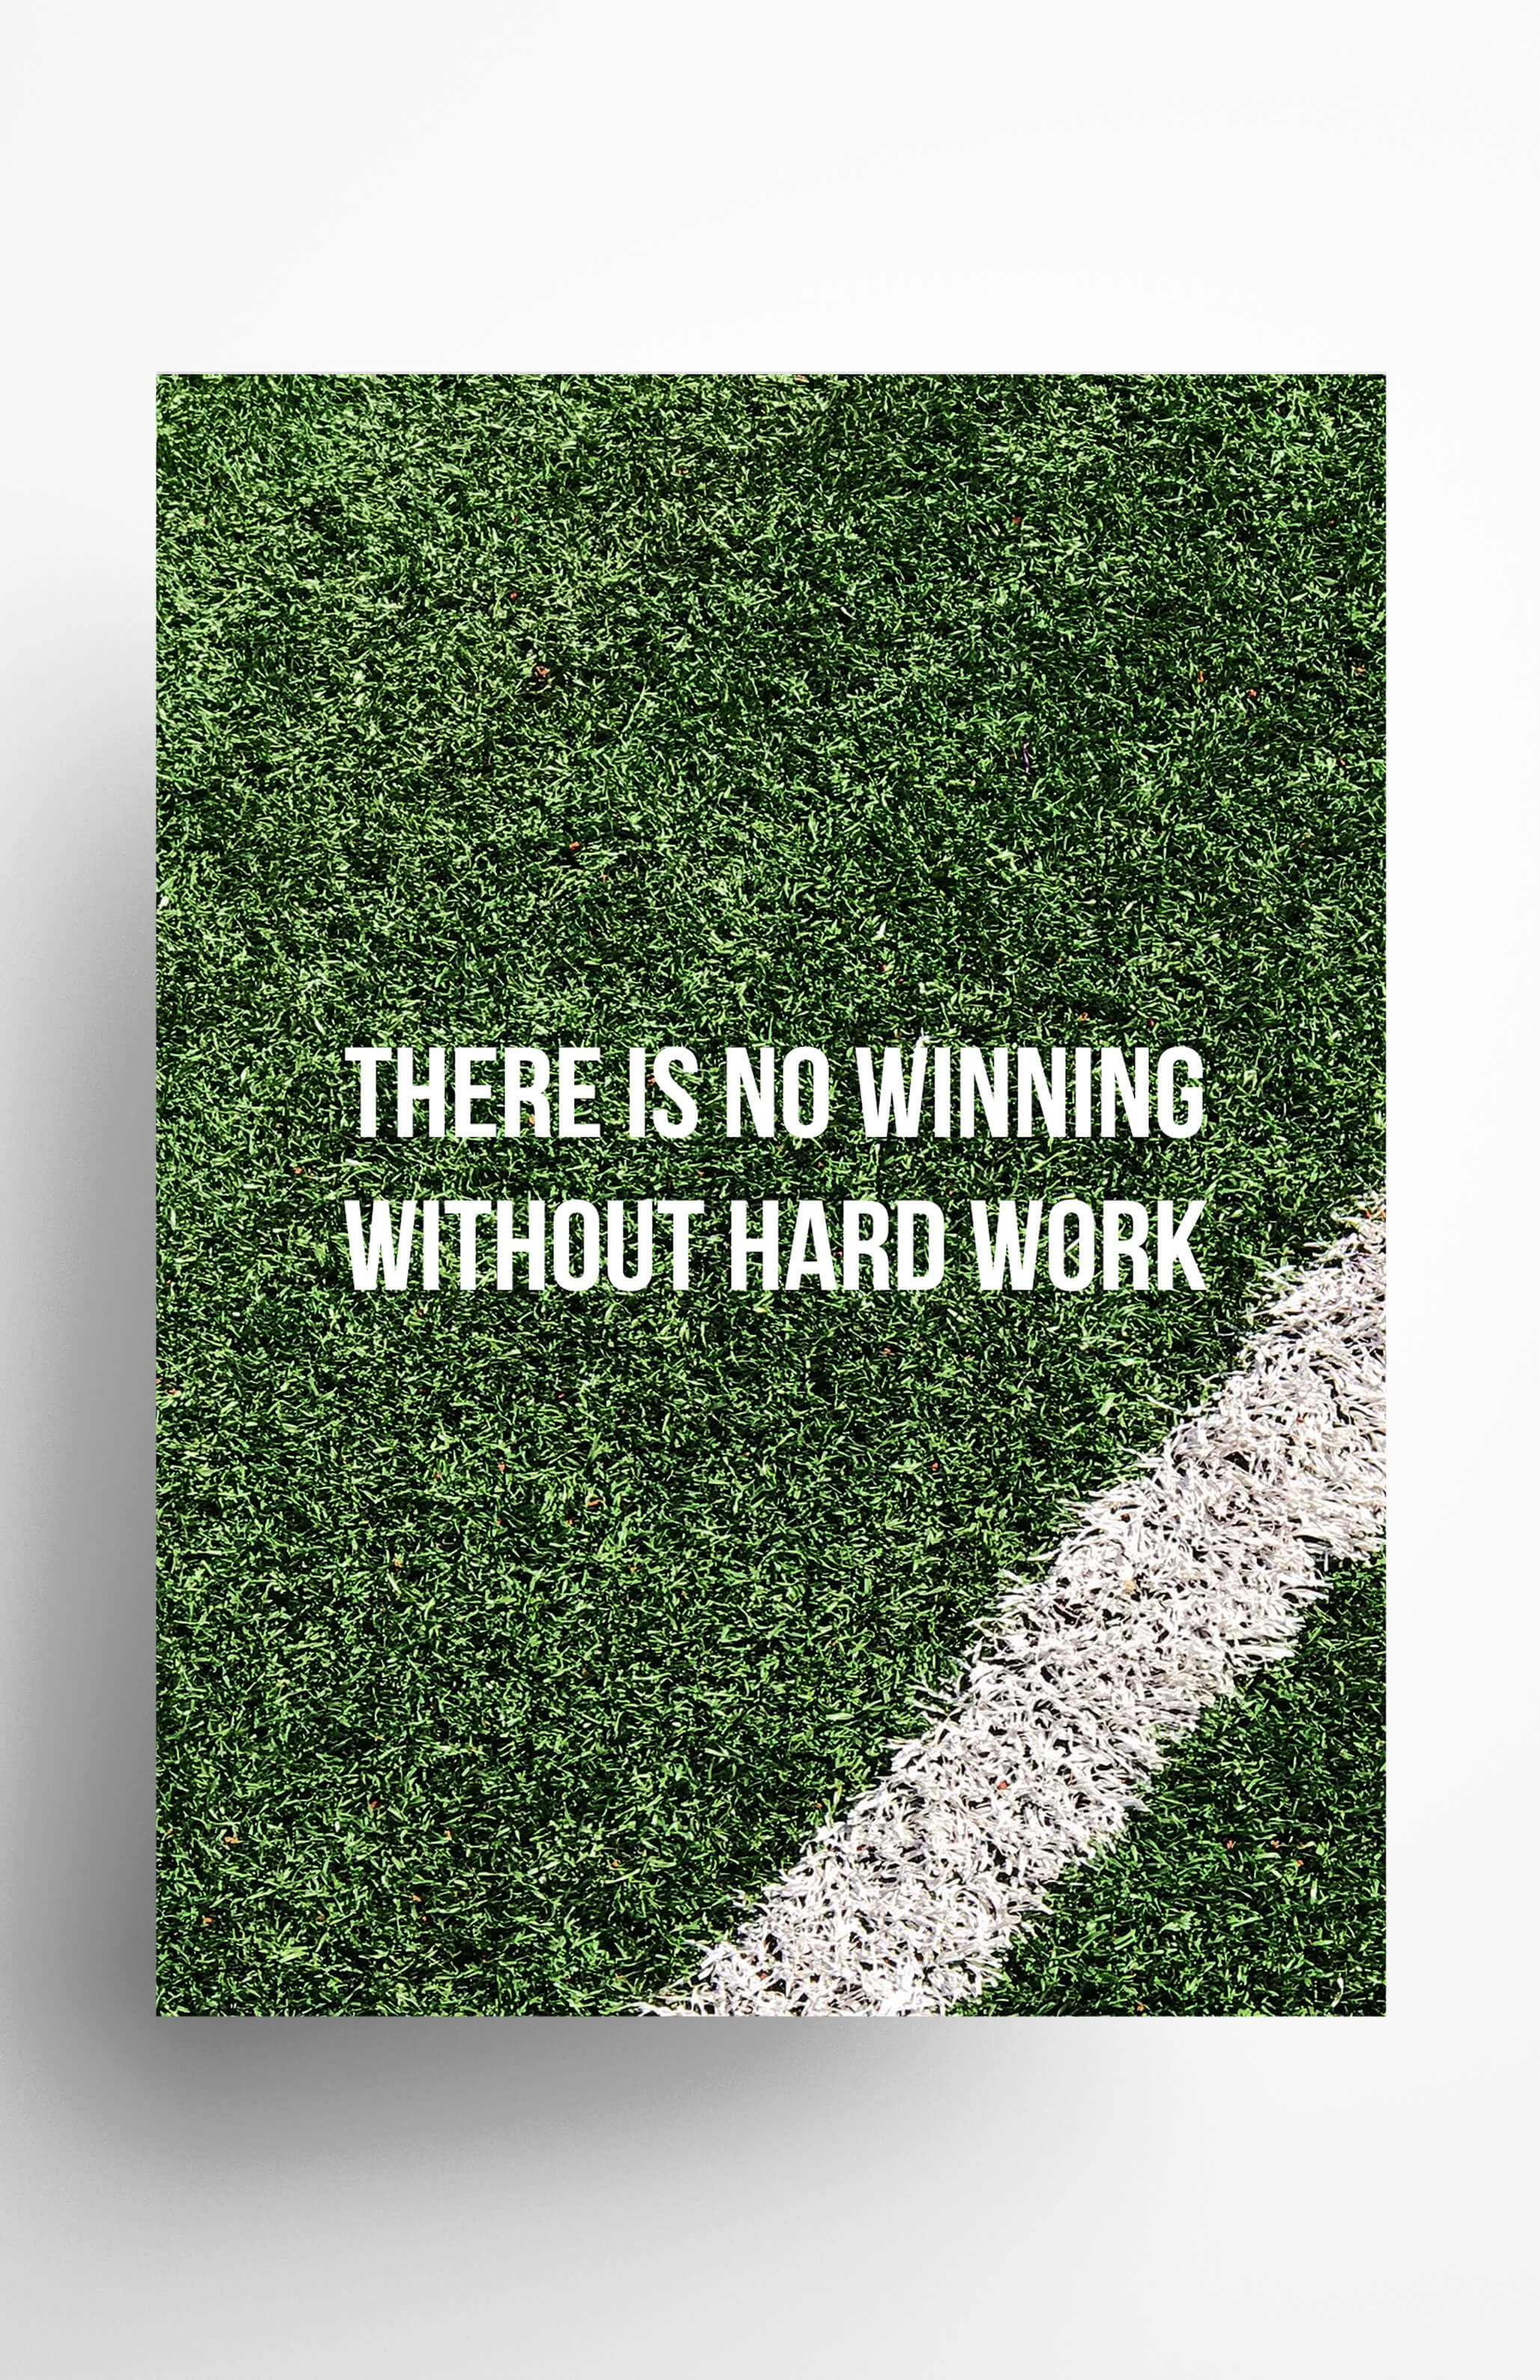 V3 Apparel womens There is No Winning without Hard Work, Motivational posters, mens inspirational wall artwork and empowering poster quote designs for office, home gym, school, kitchen and living room.